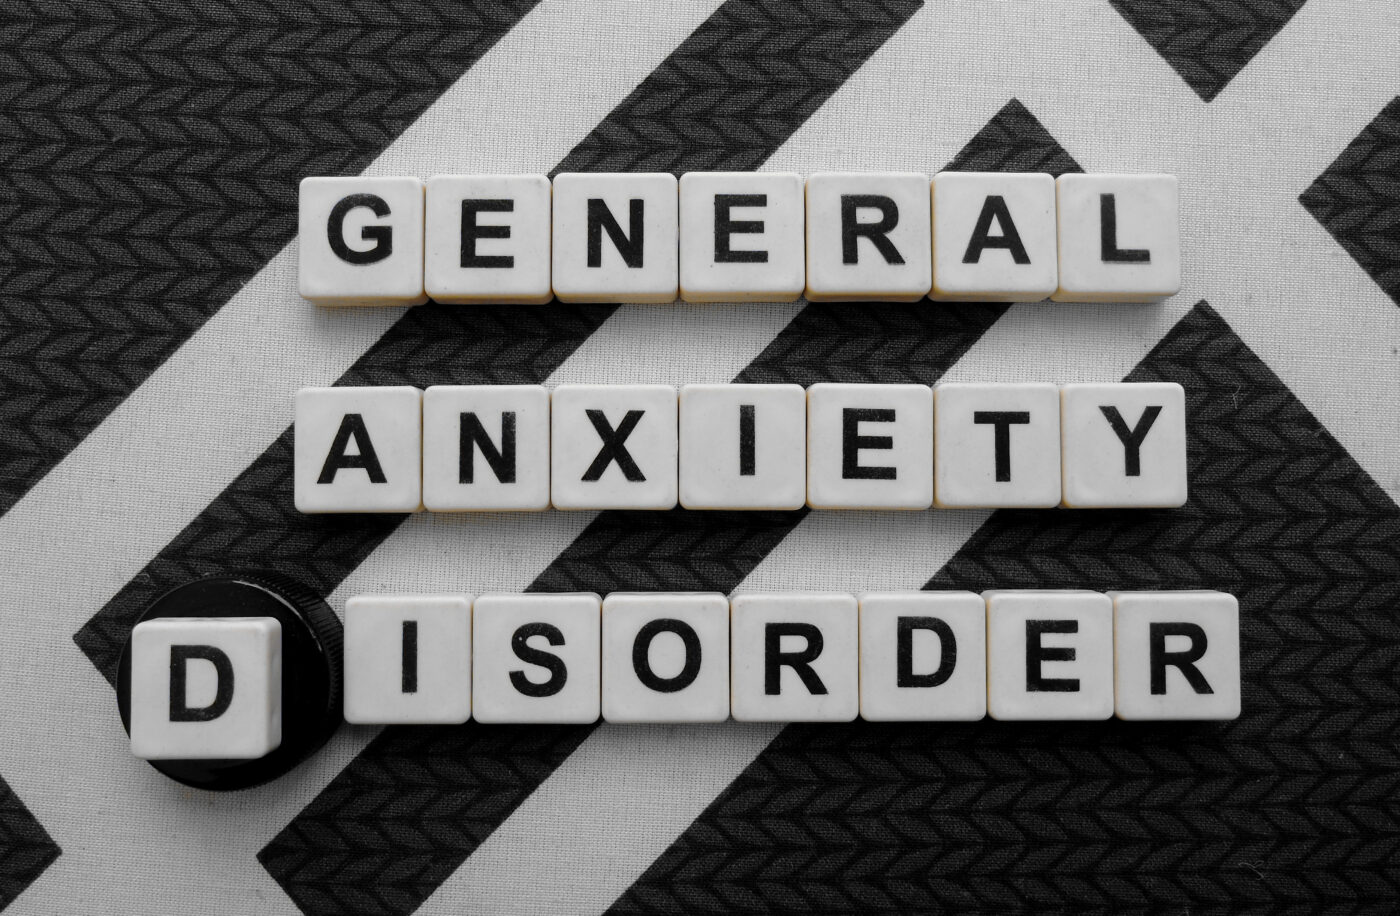 generalized anxiety disorder